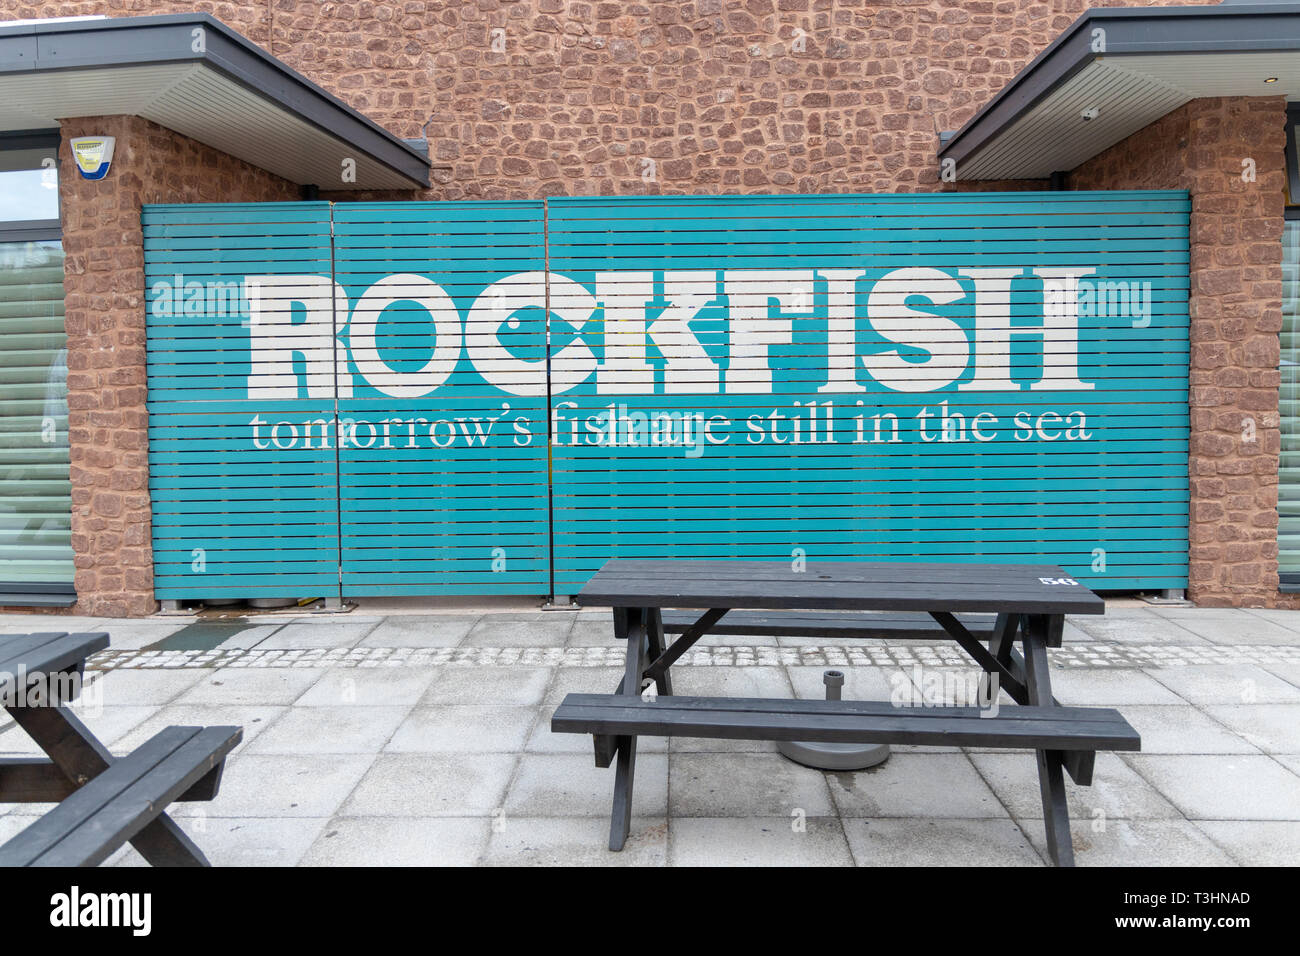 Rockfish fish and chip restaurant,  Exeter Stock Photo